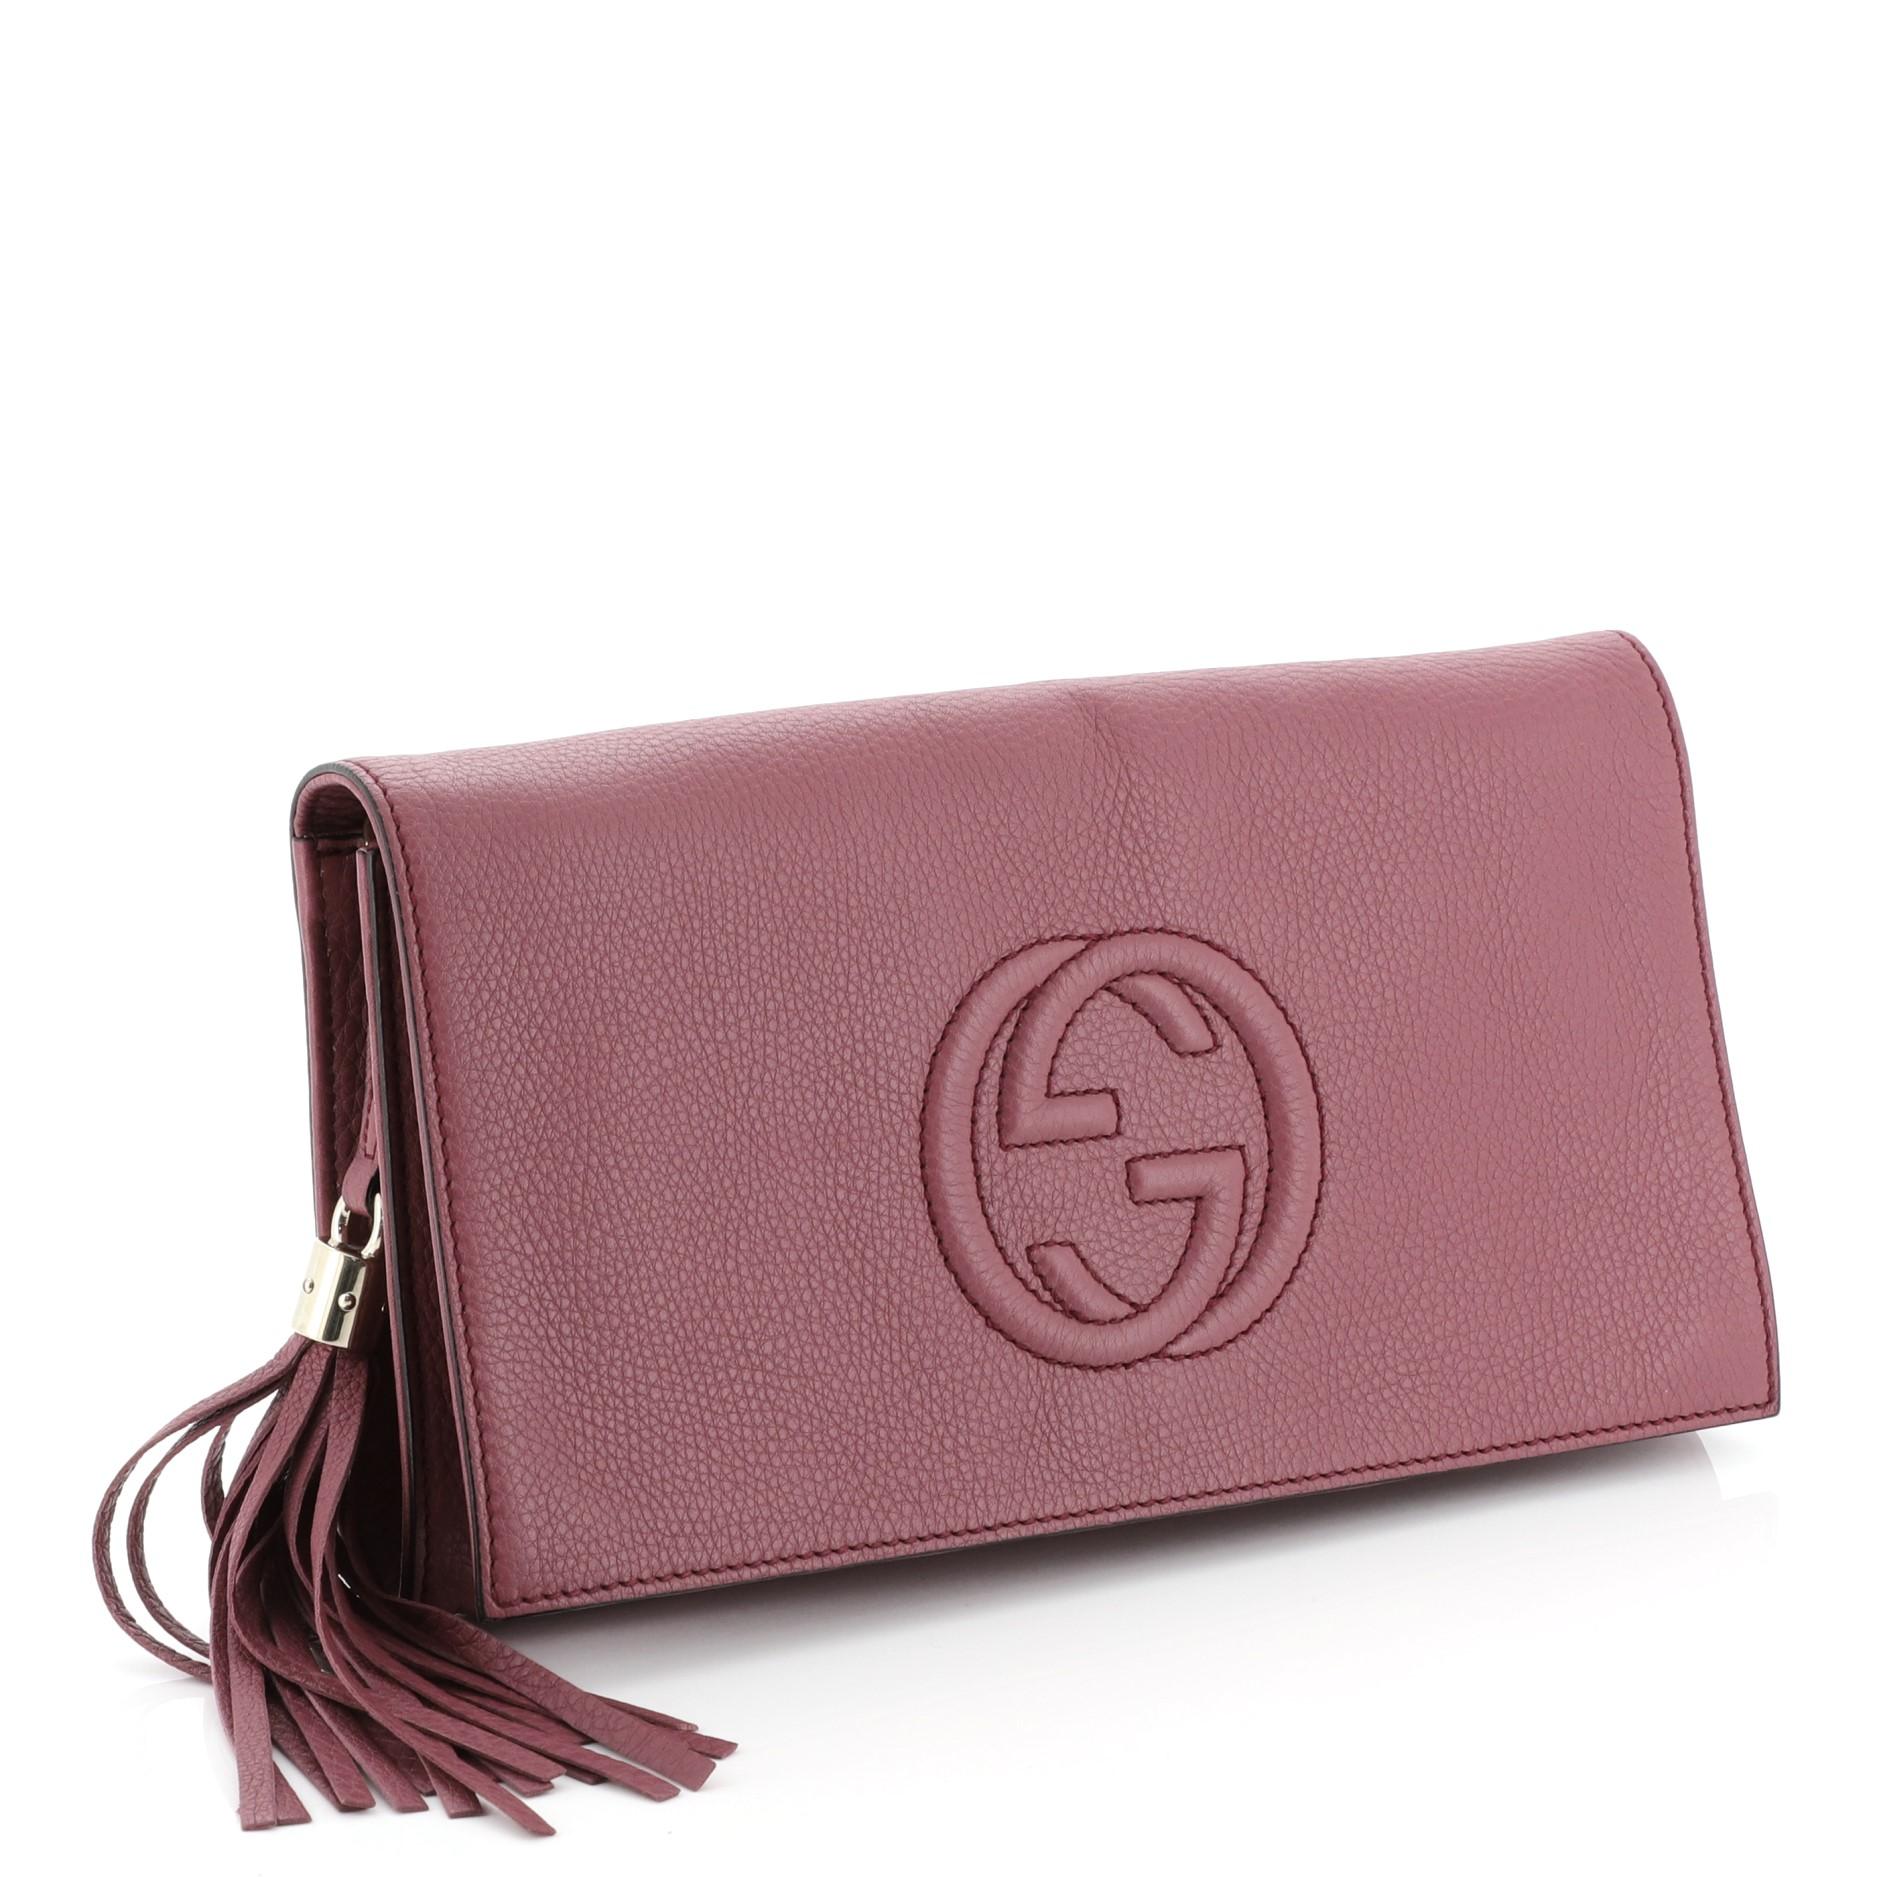 This Gucci Soho Clutch Leather, crafted from purple leather, features leather tassels, embossed interlocking GG logo, and gold-tone hardware. Its hidden magnetic snap closure opens to a neutral fabric interior with zip and slip pockets. 

Estimated